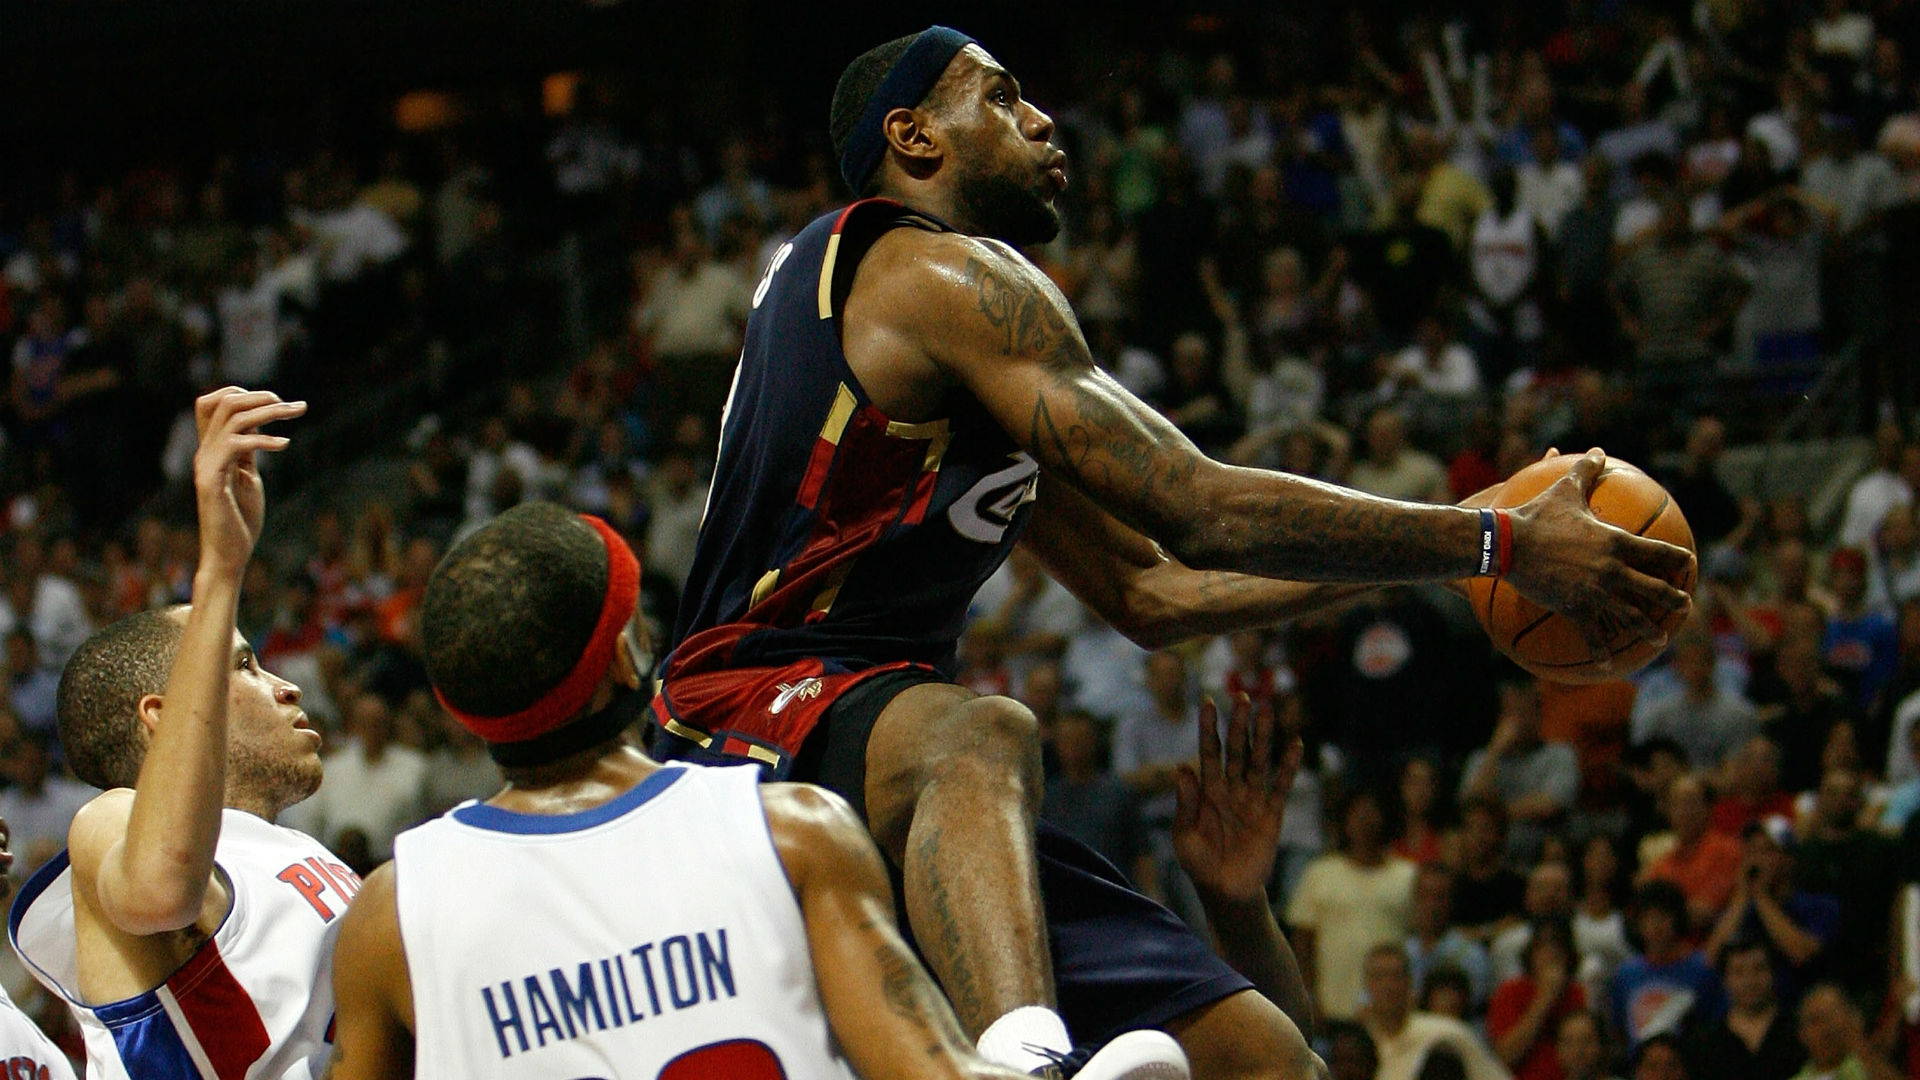 Exactly 10 years ago, LeBron James single-handedly destroyed the Pistons | Sporting News